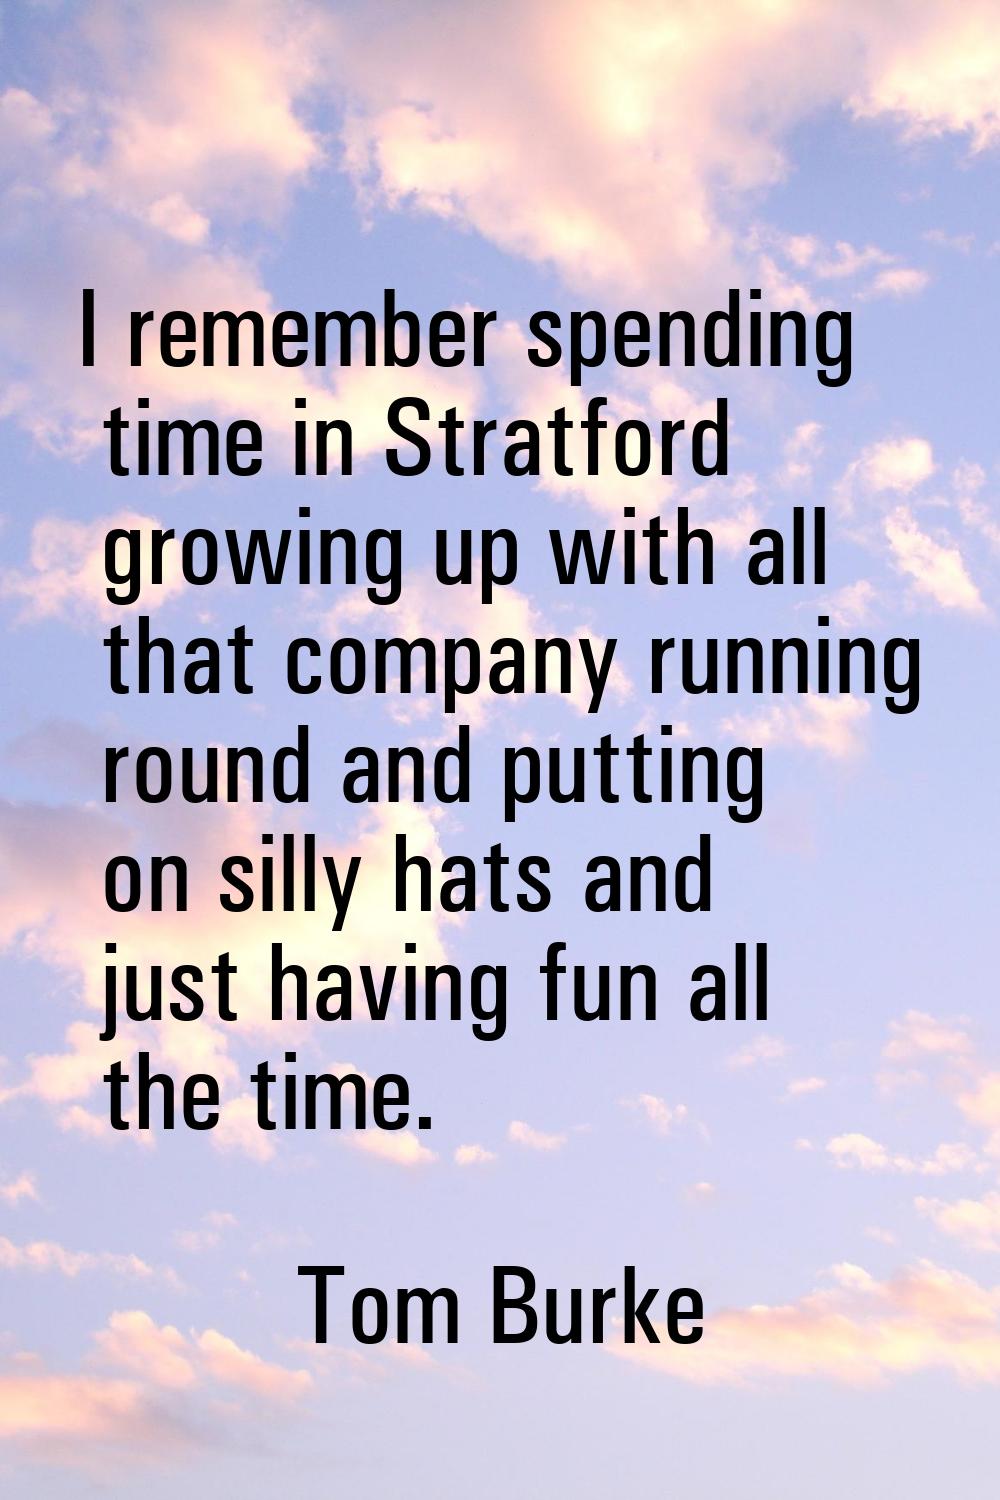 I remember spending time in Stratford growing up with all that company running round and putting on